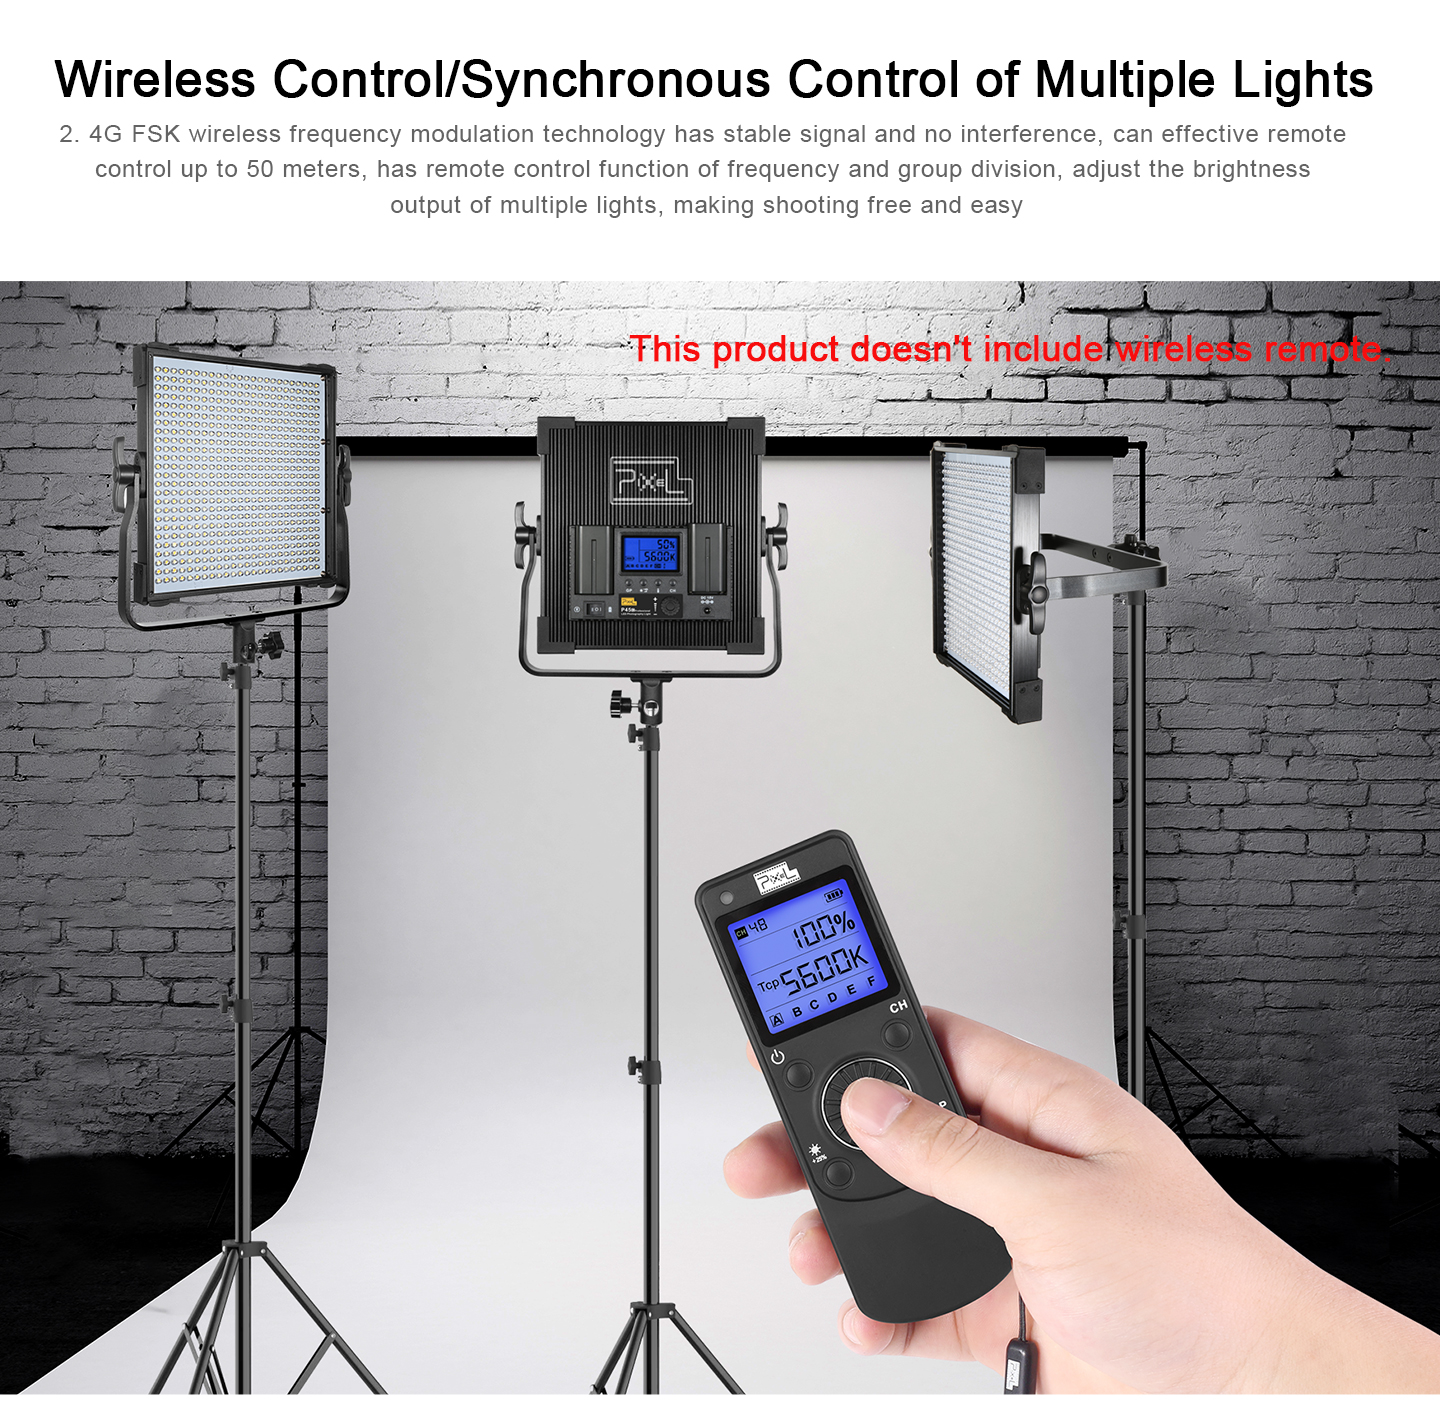 Wireless Control/Syncchronous Control of Multiple Lights